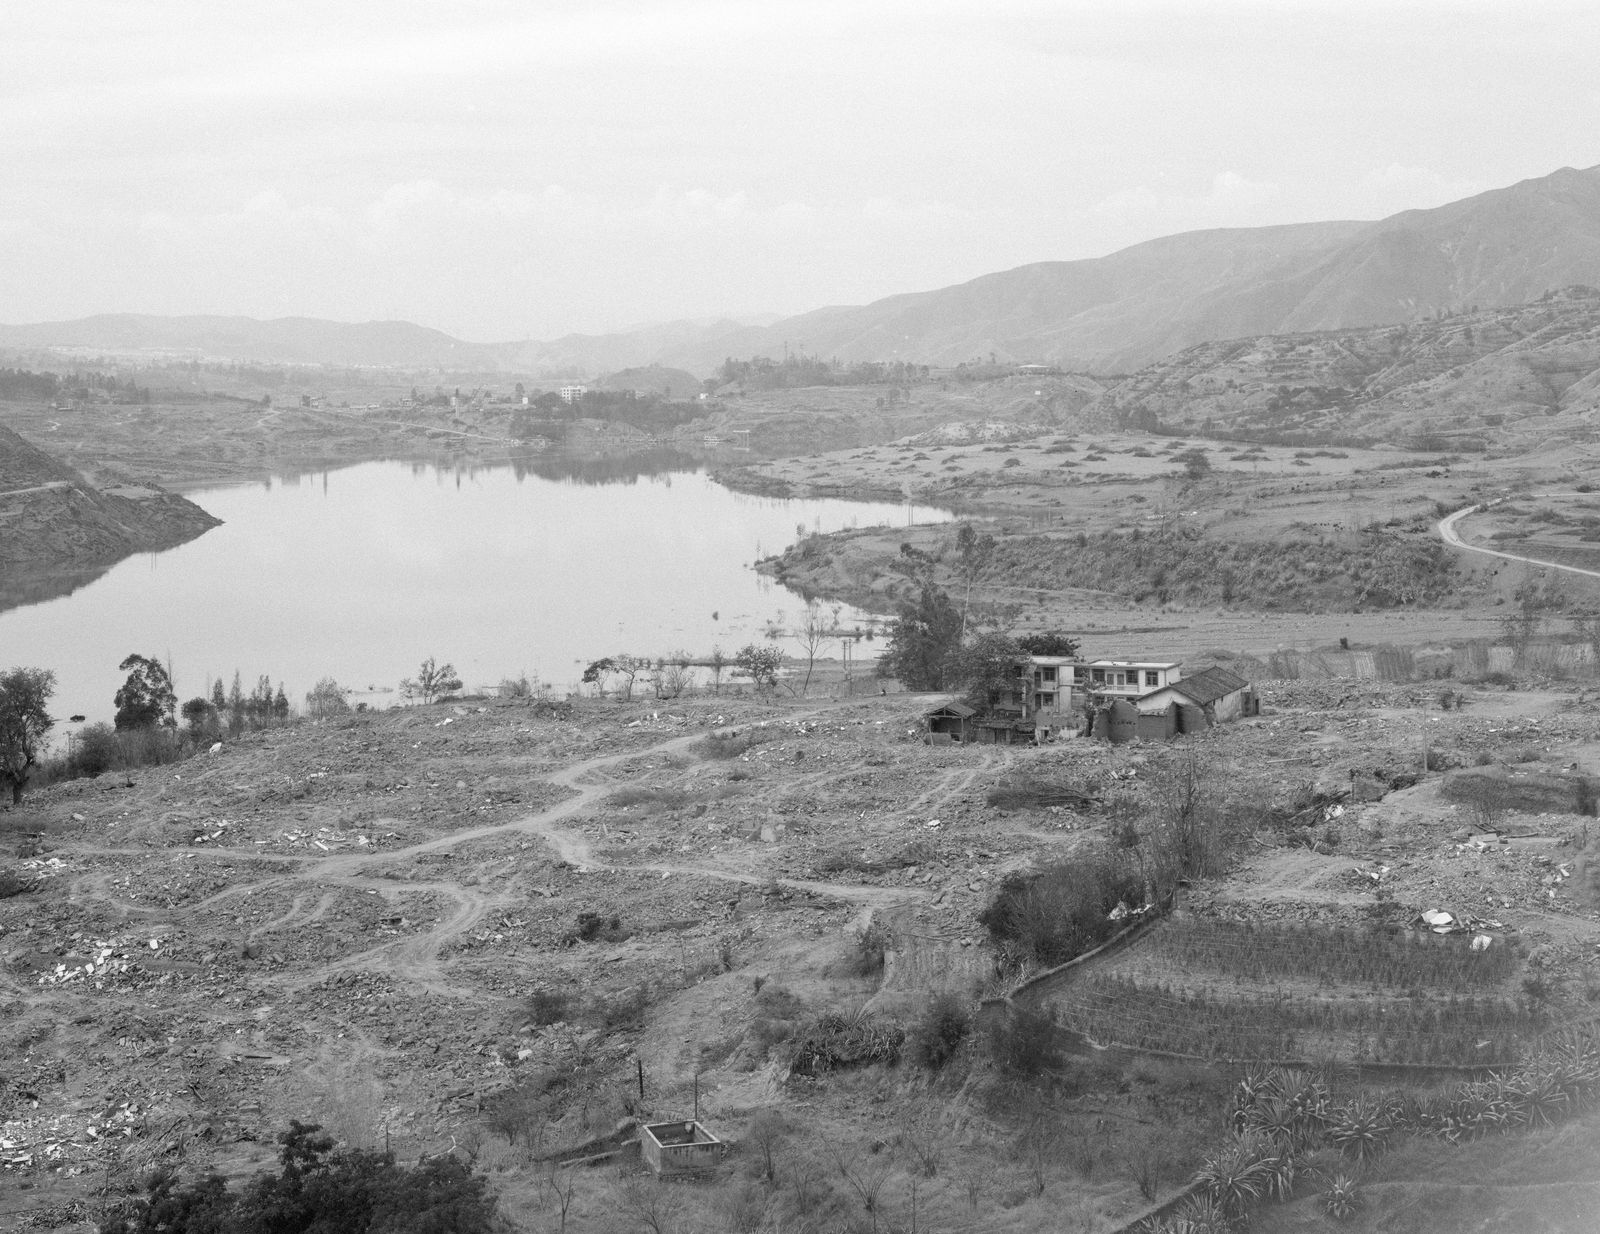 © Yexin Qiu & Moying Zhang - The villages demolished during the construction of the reservoir dam.